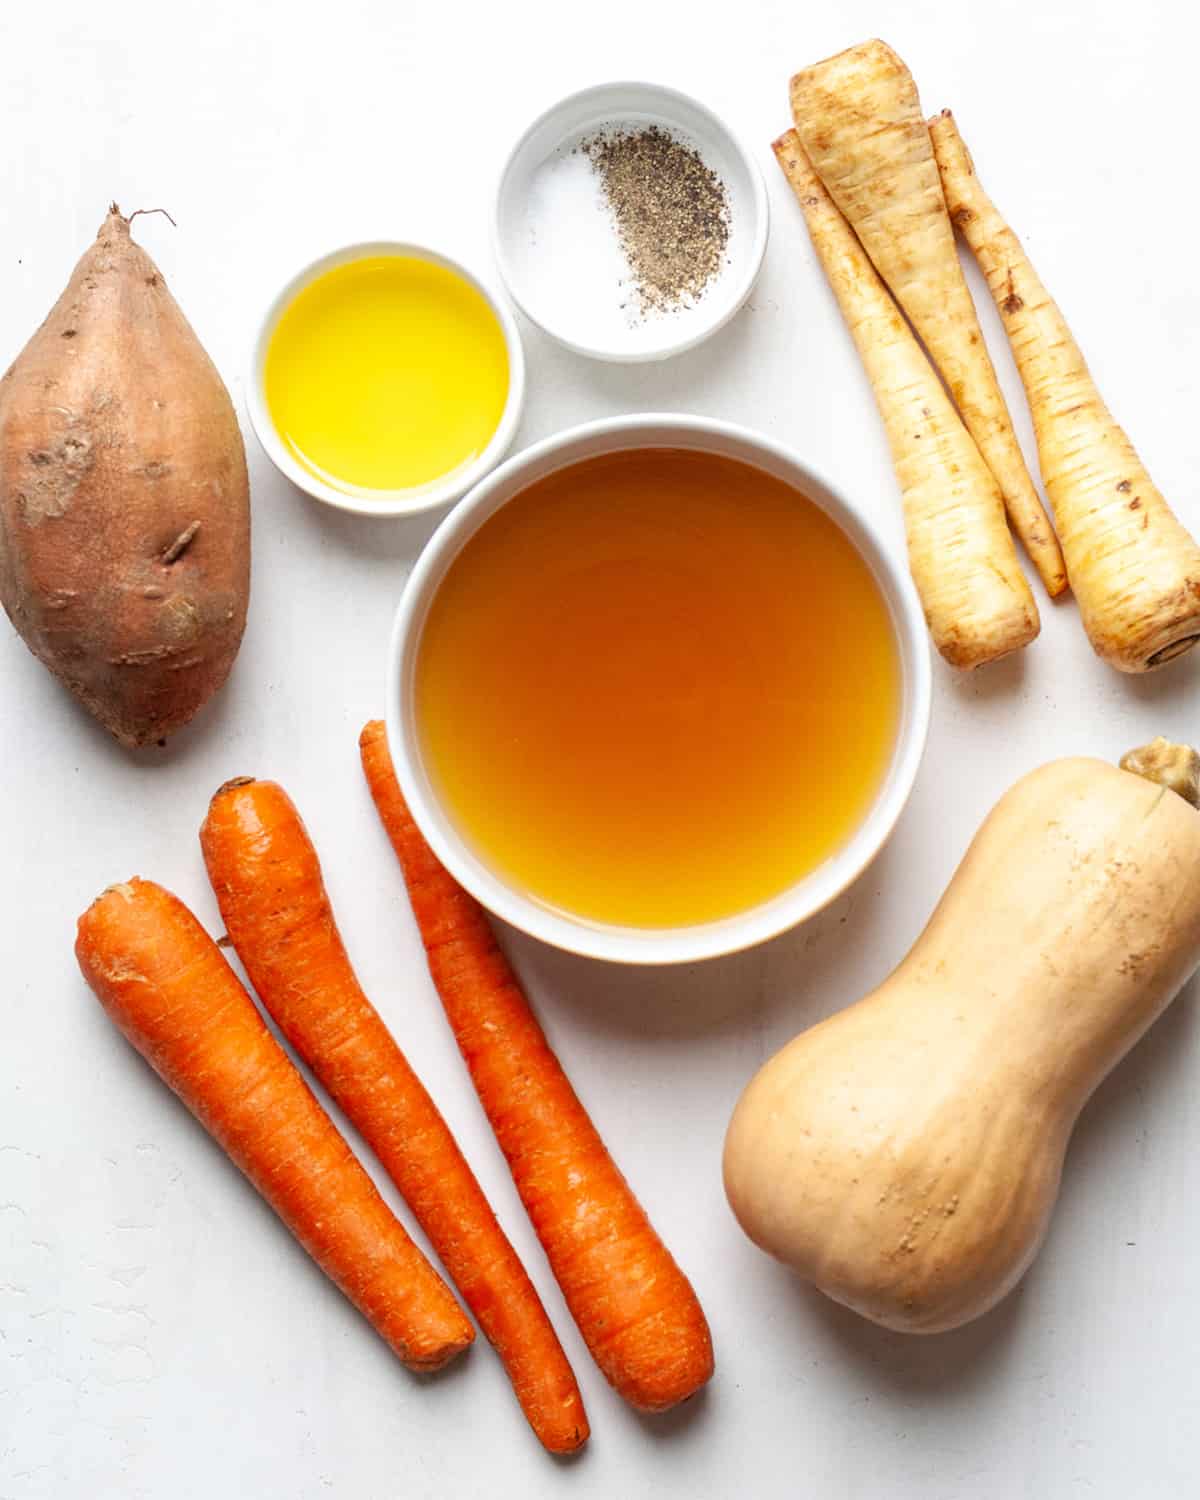 ingredients in this Roasted Vegetable Soup recipe